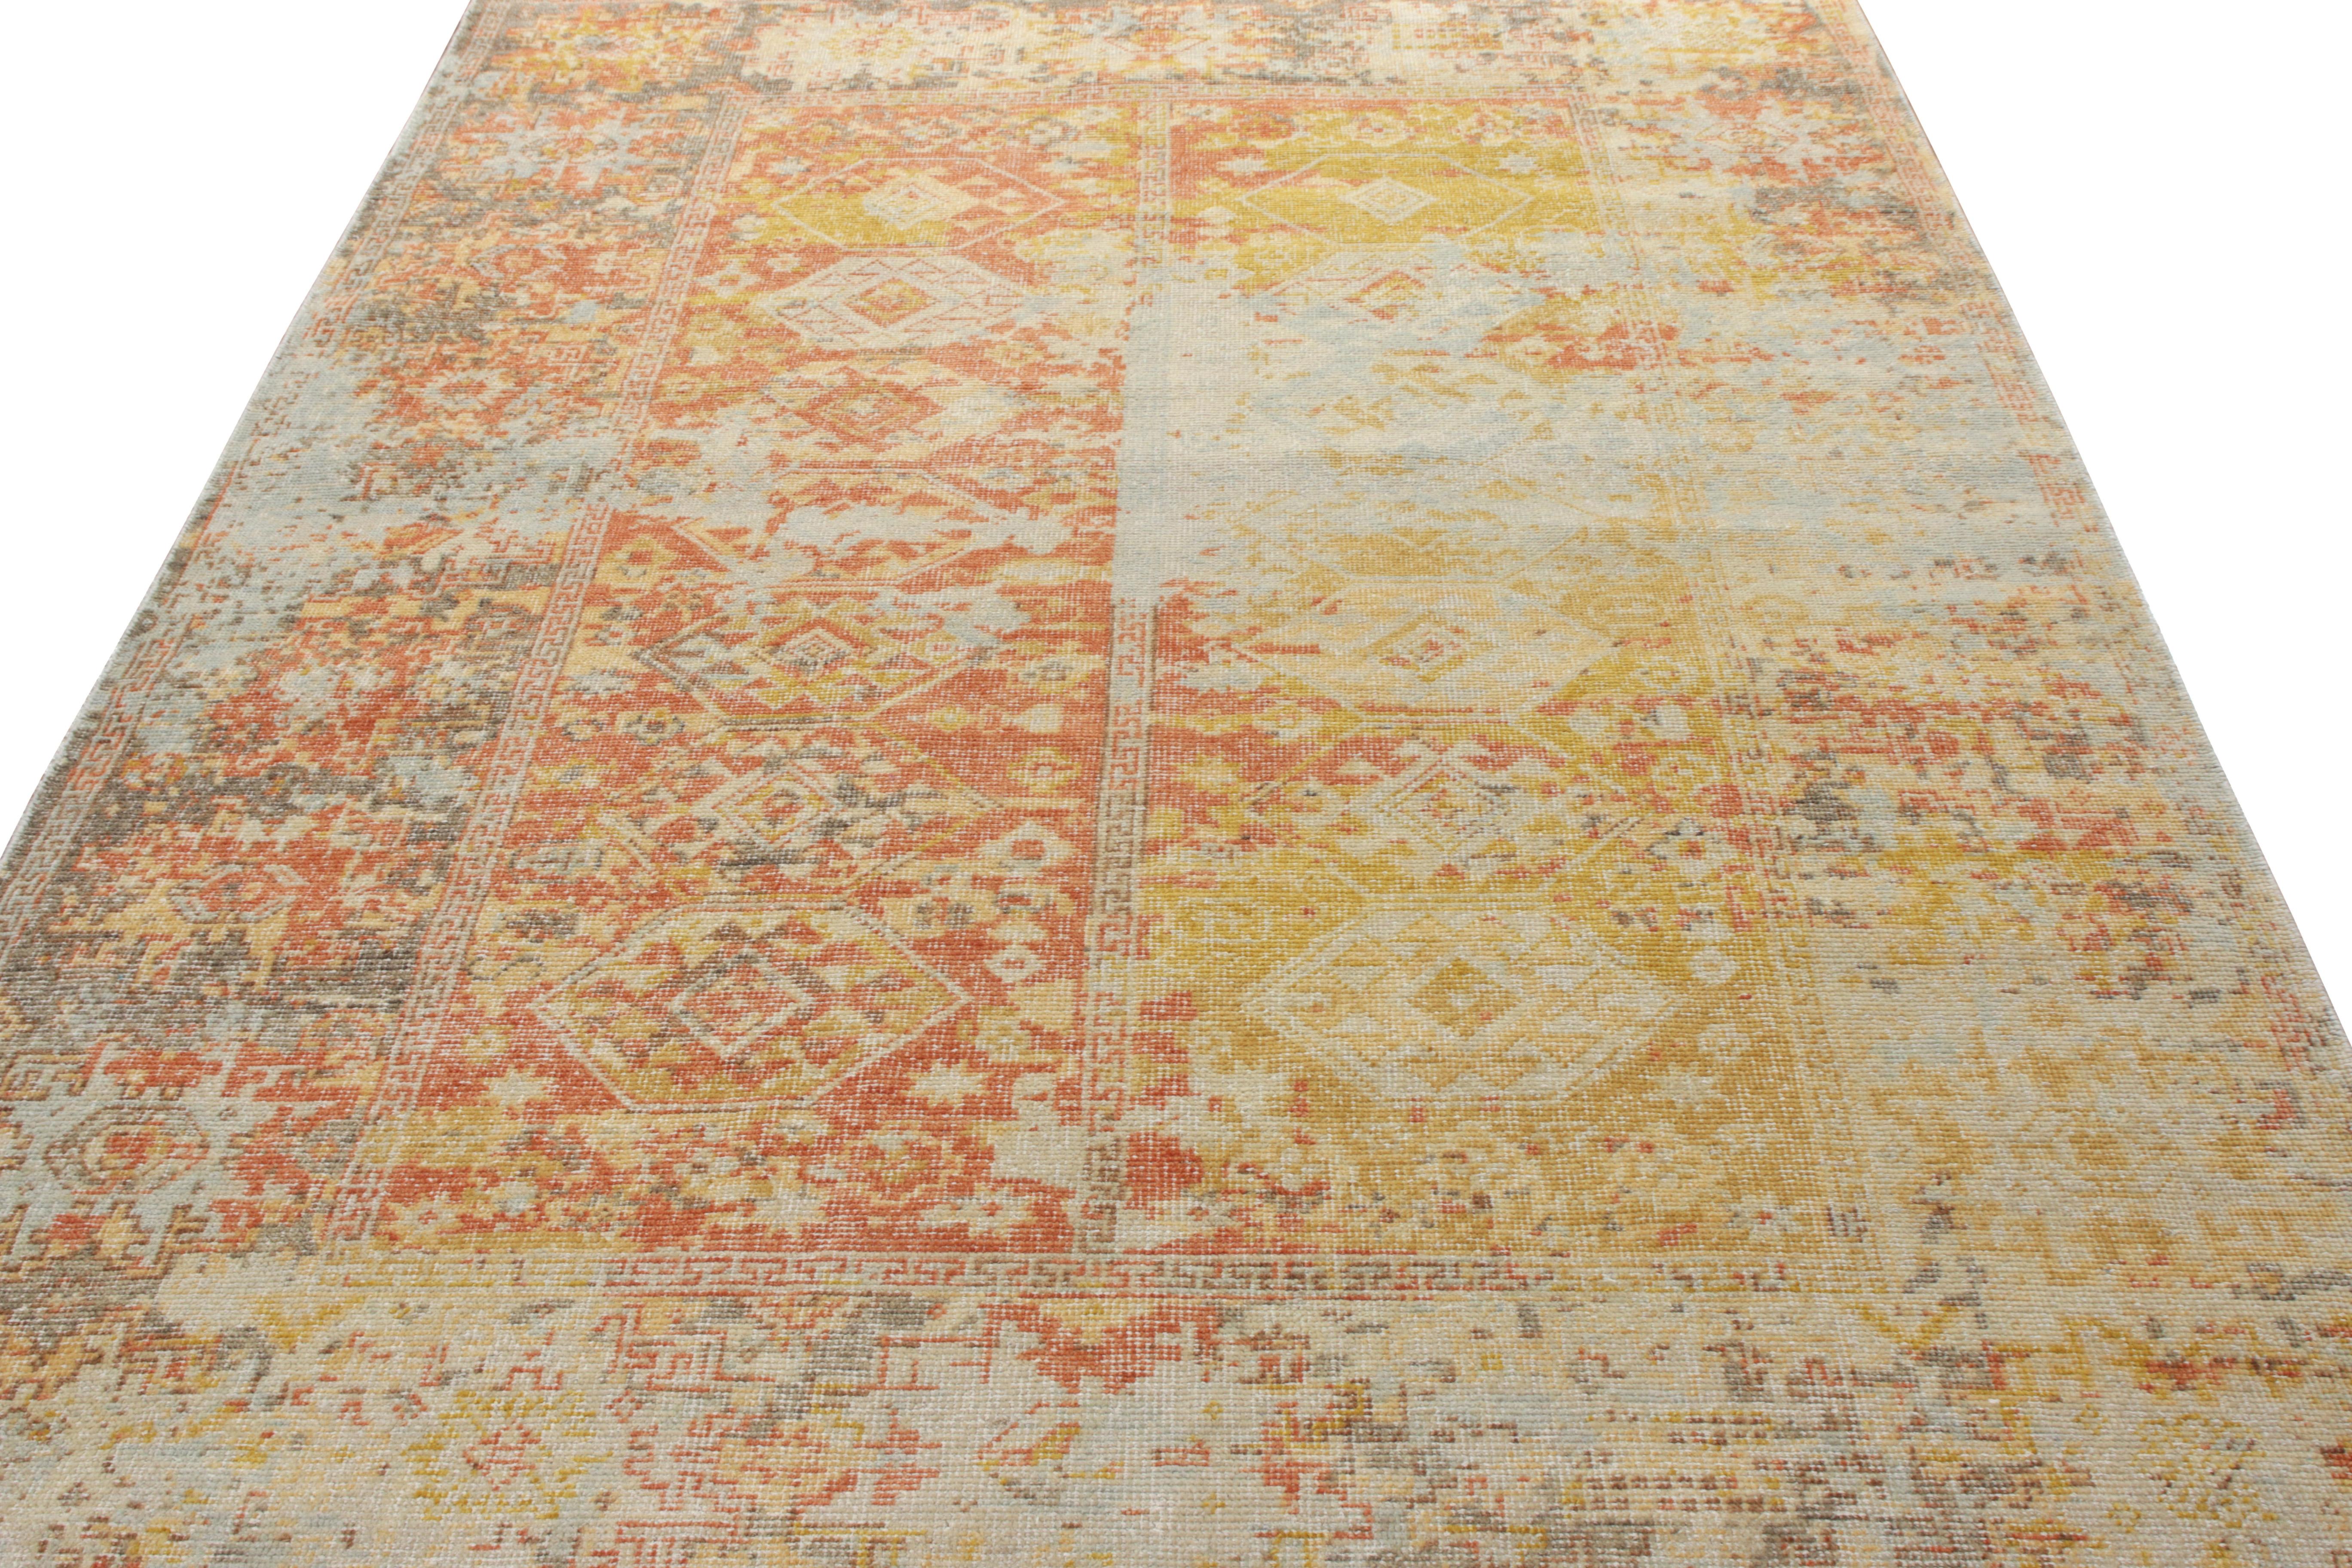 Created with a unique blend of yarn, Rug & Kilim presents this classic-inspired custom rug design from its Homage Collection. Exemplified in this 6x9 edition, the rug features a geometric pattern in a distinctive colour combination of orange,